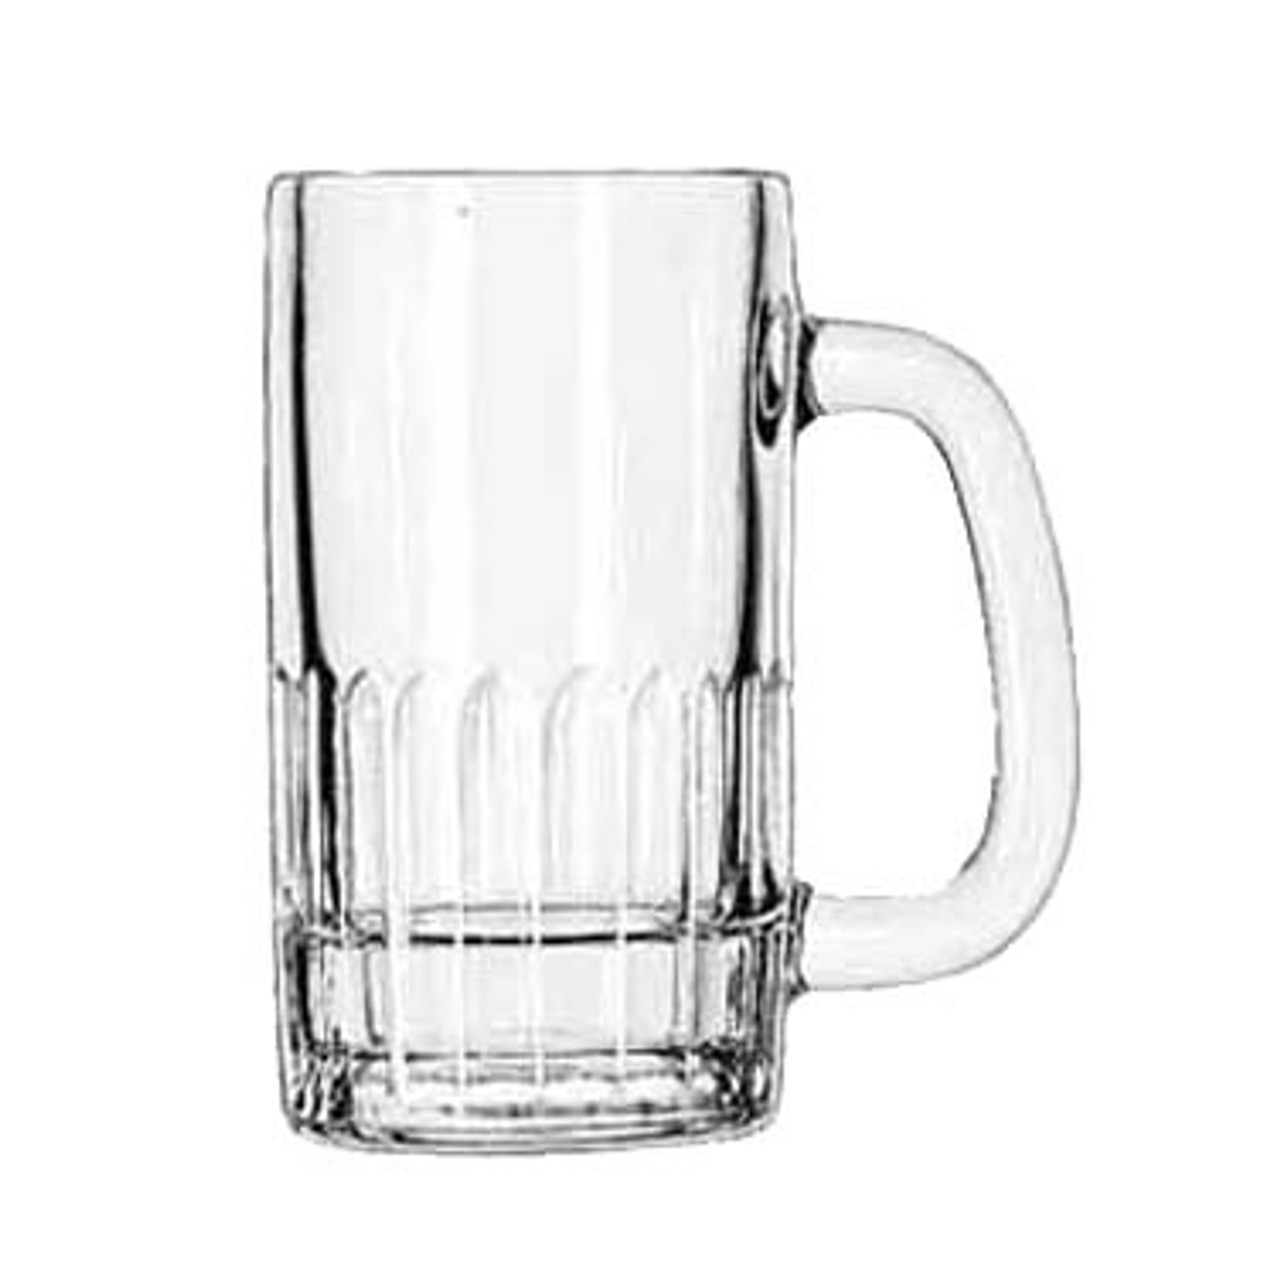 https://cdn11.bigcommerce.com/s-g3i86bef61/images/stencil/1280x1280/products/1063/4330/Libbey-5309-Beer-Glass__71282.1667847759.jpg?c=1